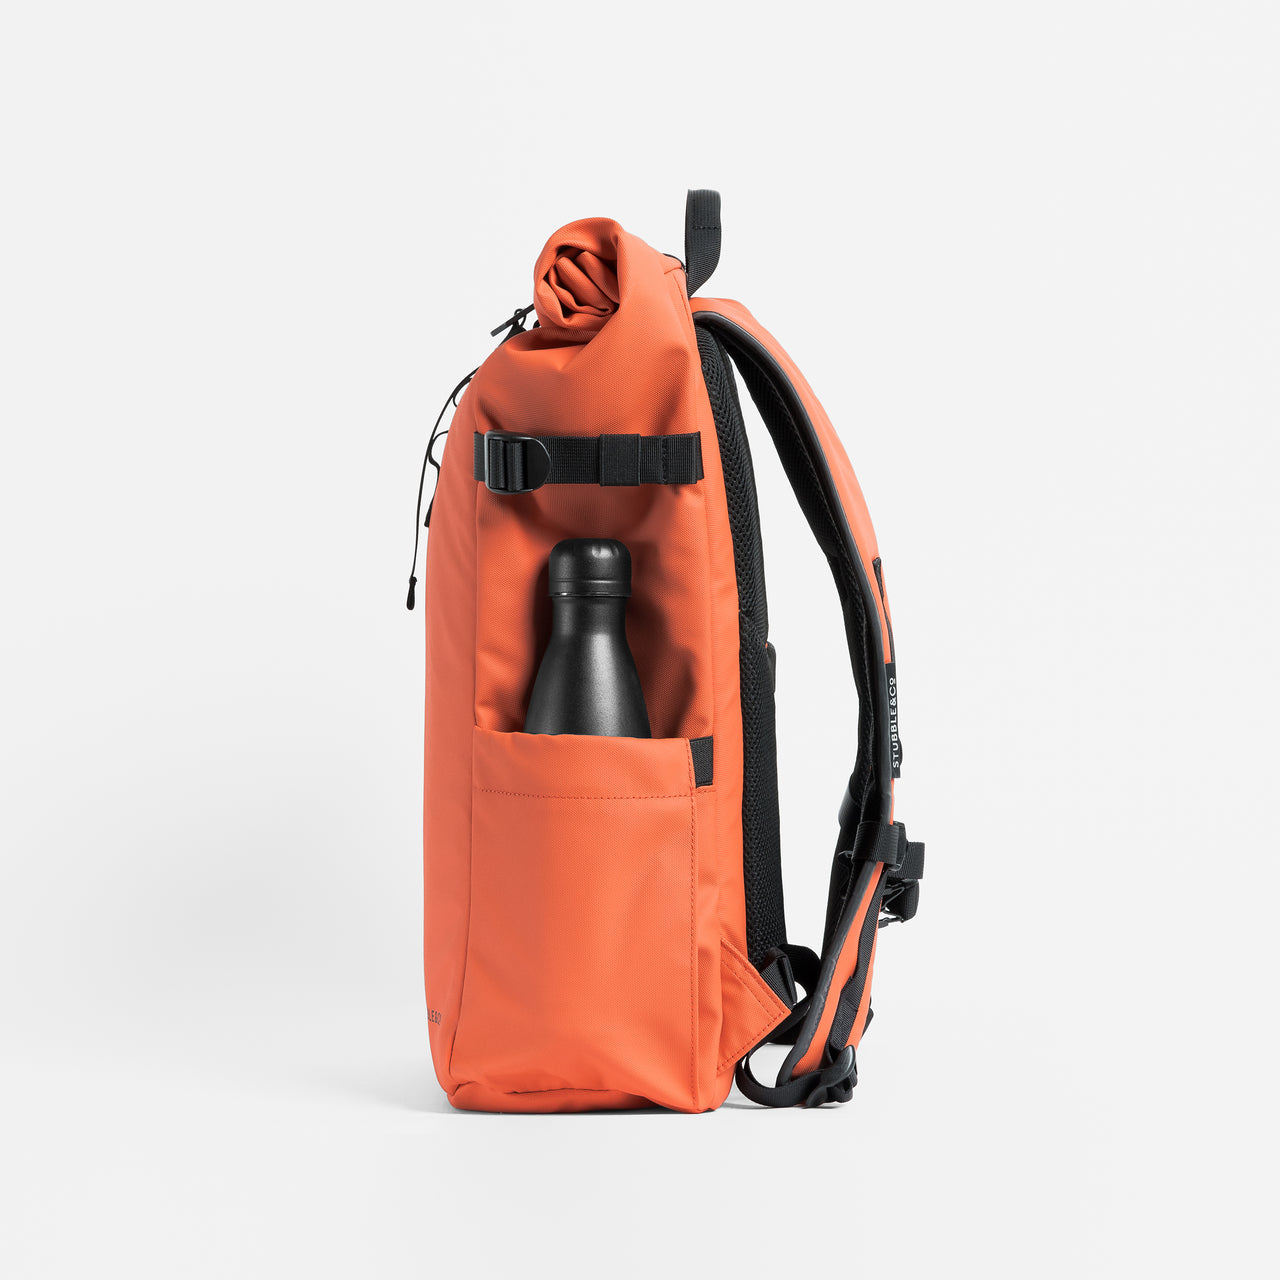 Side view of The Roll Top 20L backpack in Ember Orange